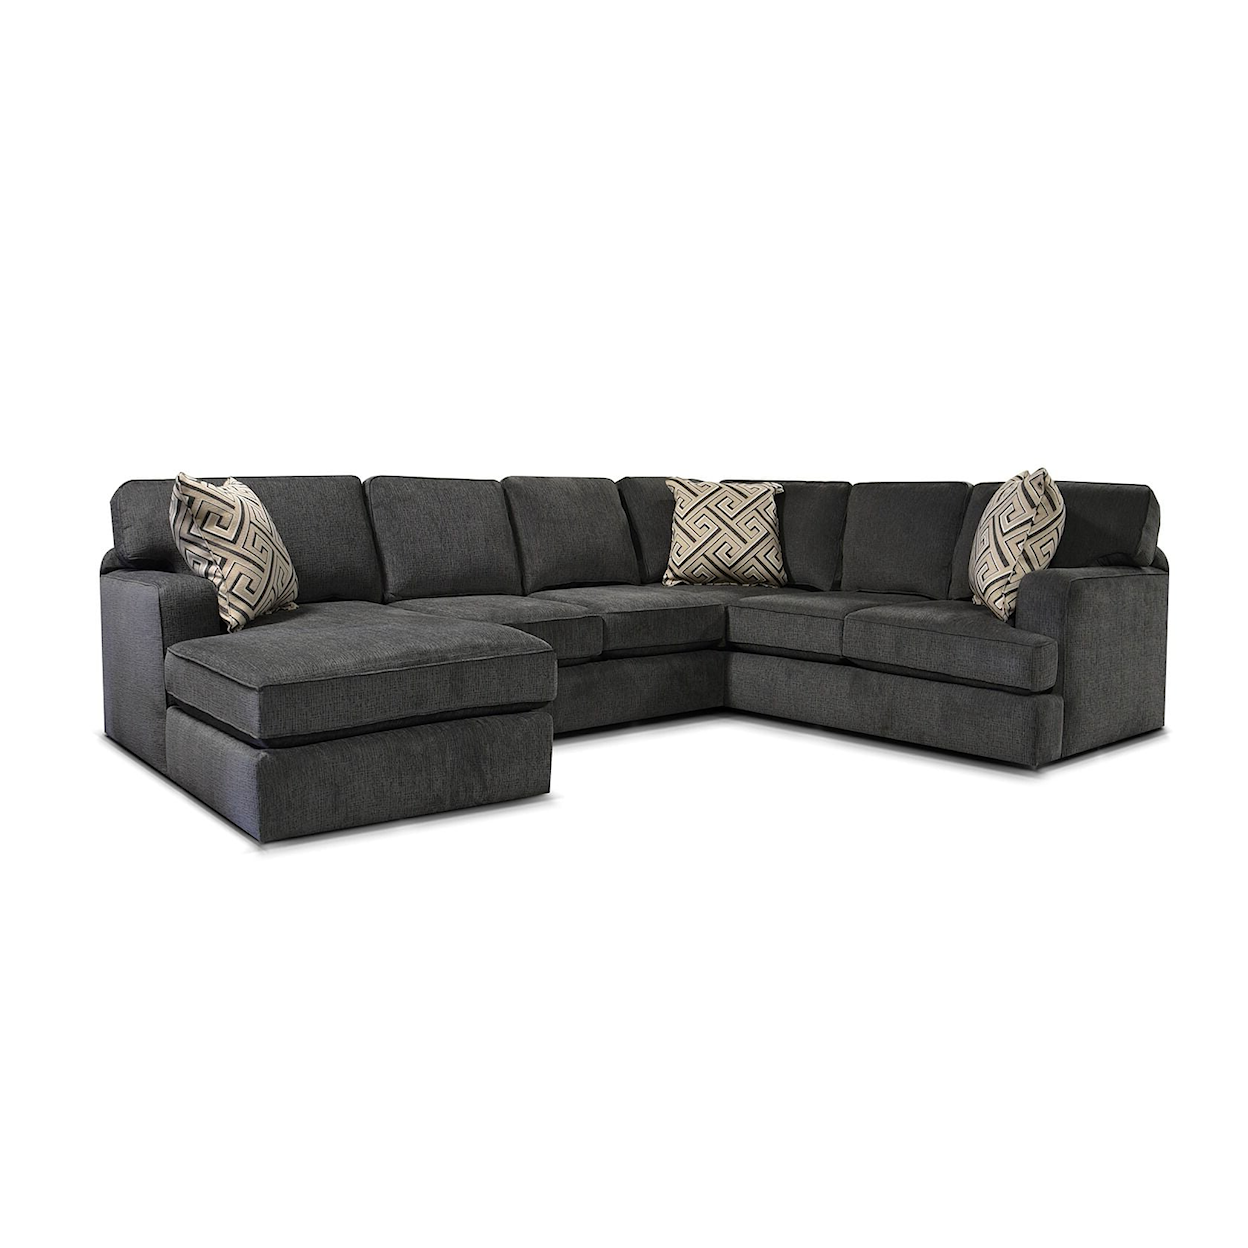 Tennessee Custom Upholstery 4R00 Series 3-Piece Chaise Sectional Sofa